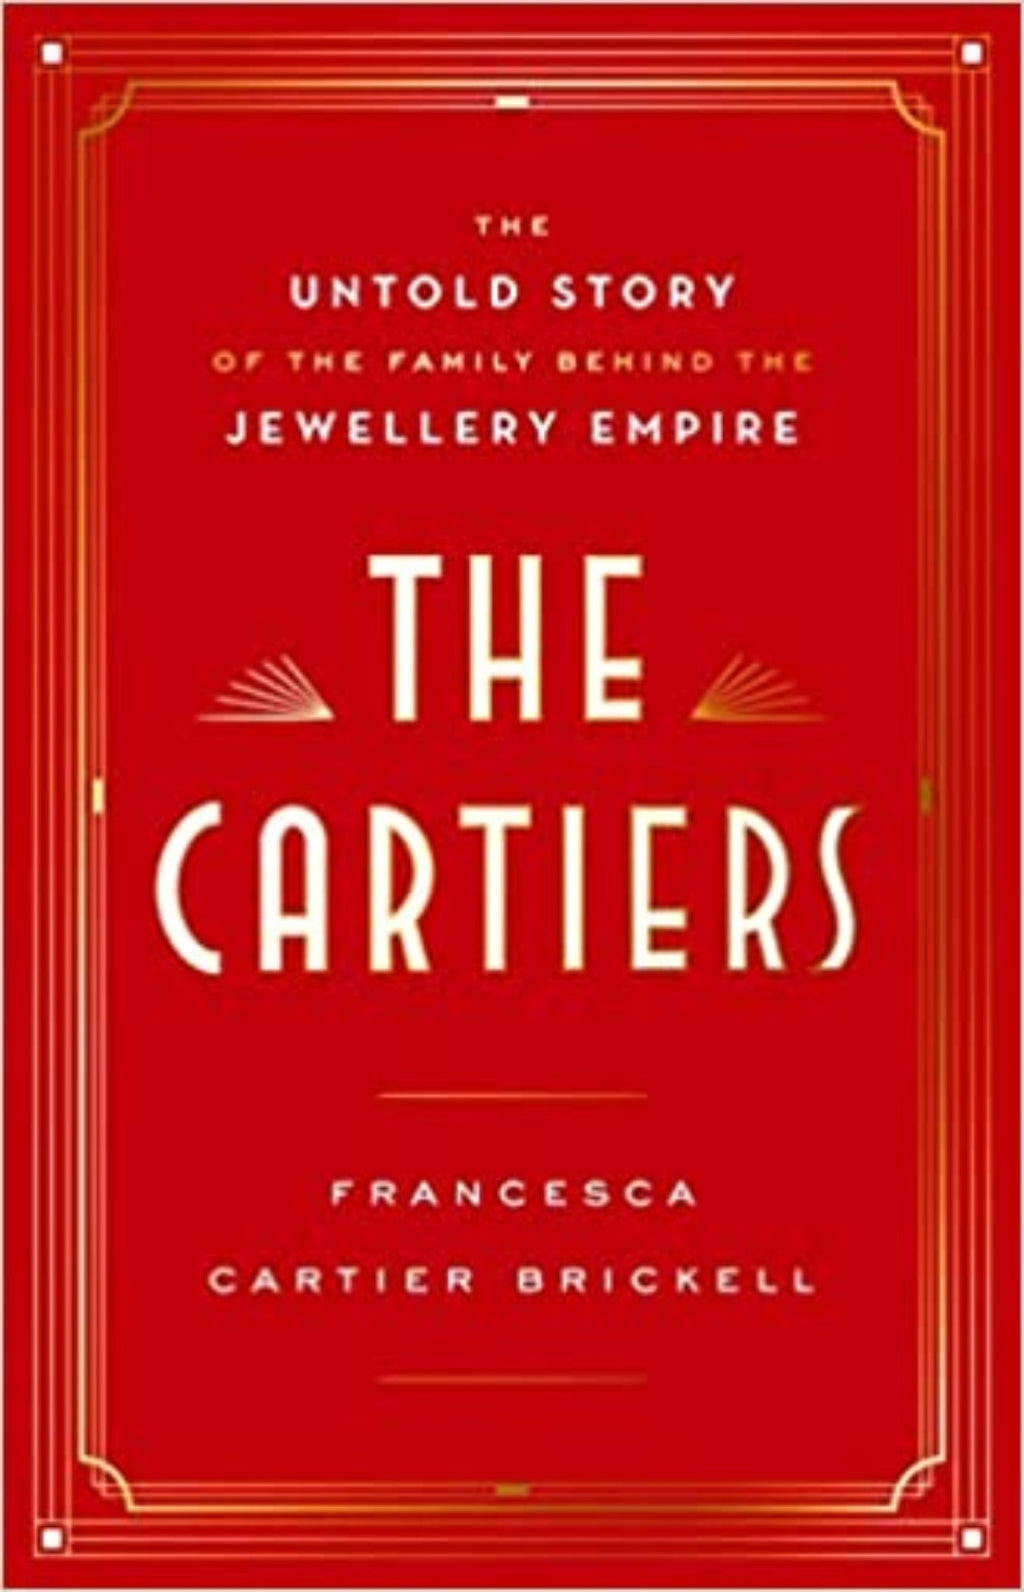 The Cartiers: The Untold Story of the Family Behind the Jewelry Empire